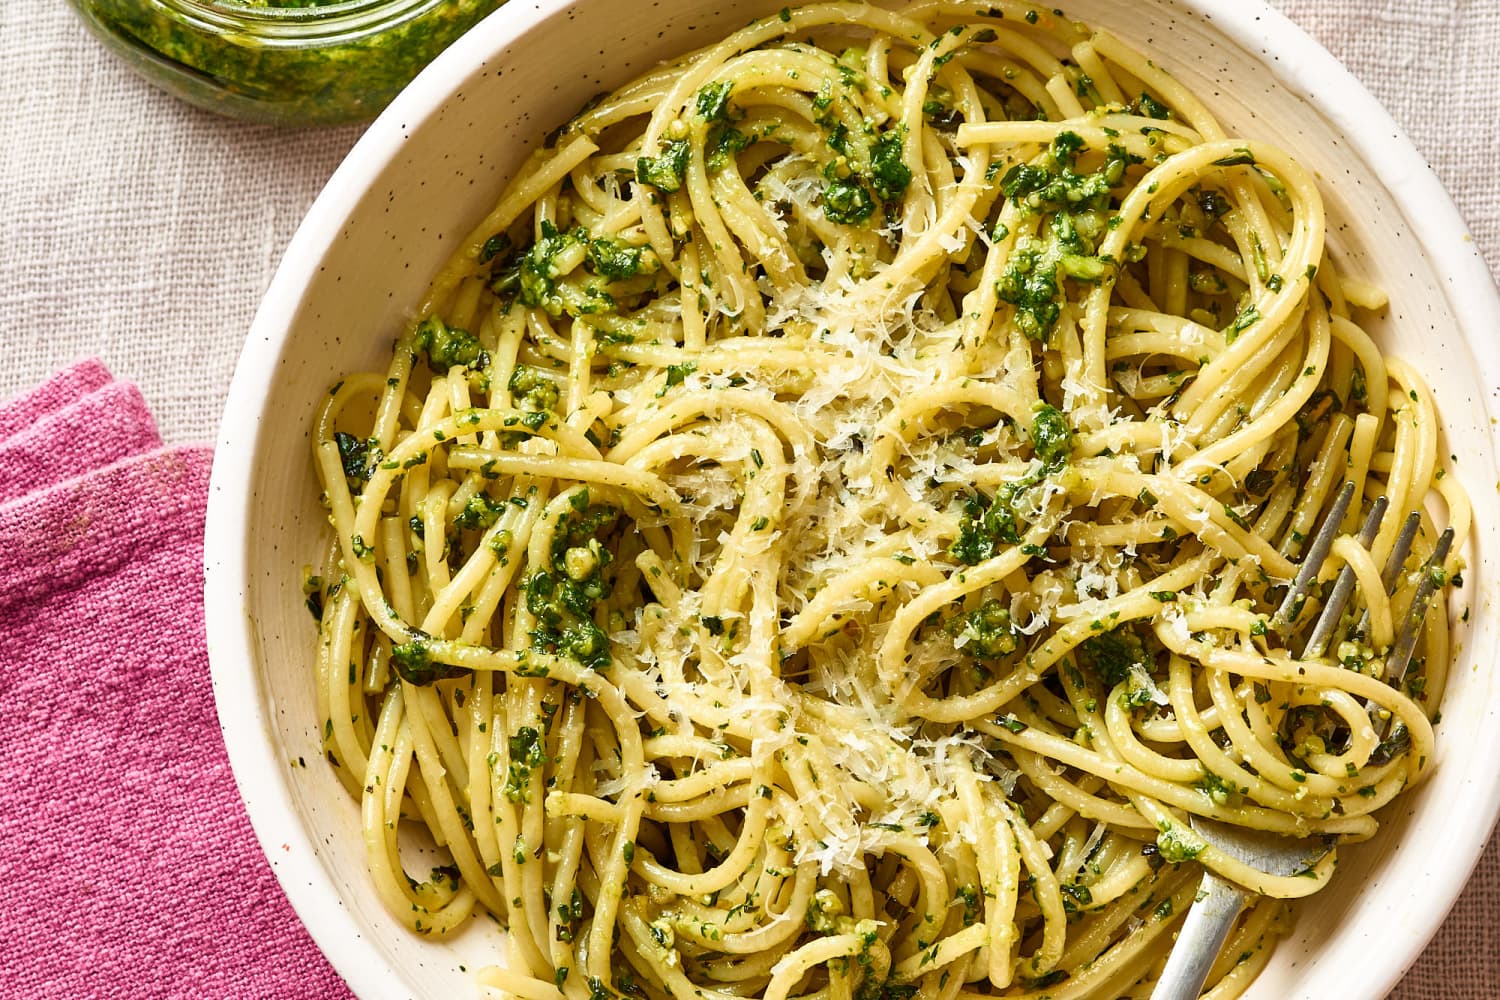 The Store-Bought Pesto That’s Way Better than Anything I’ve Ever Made from Scratch